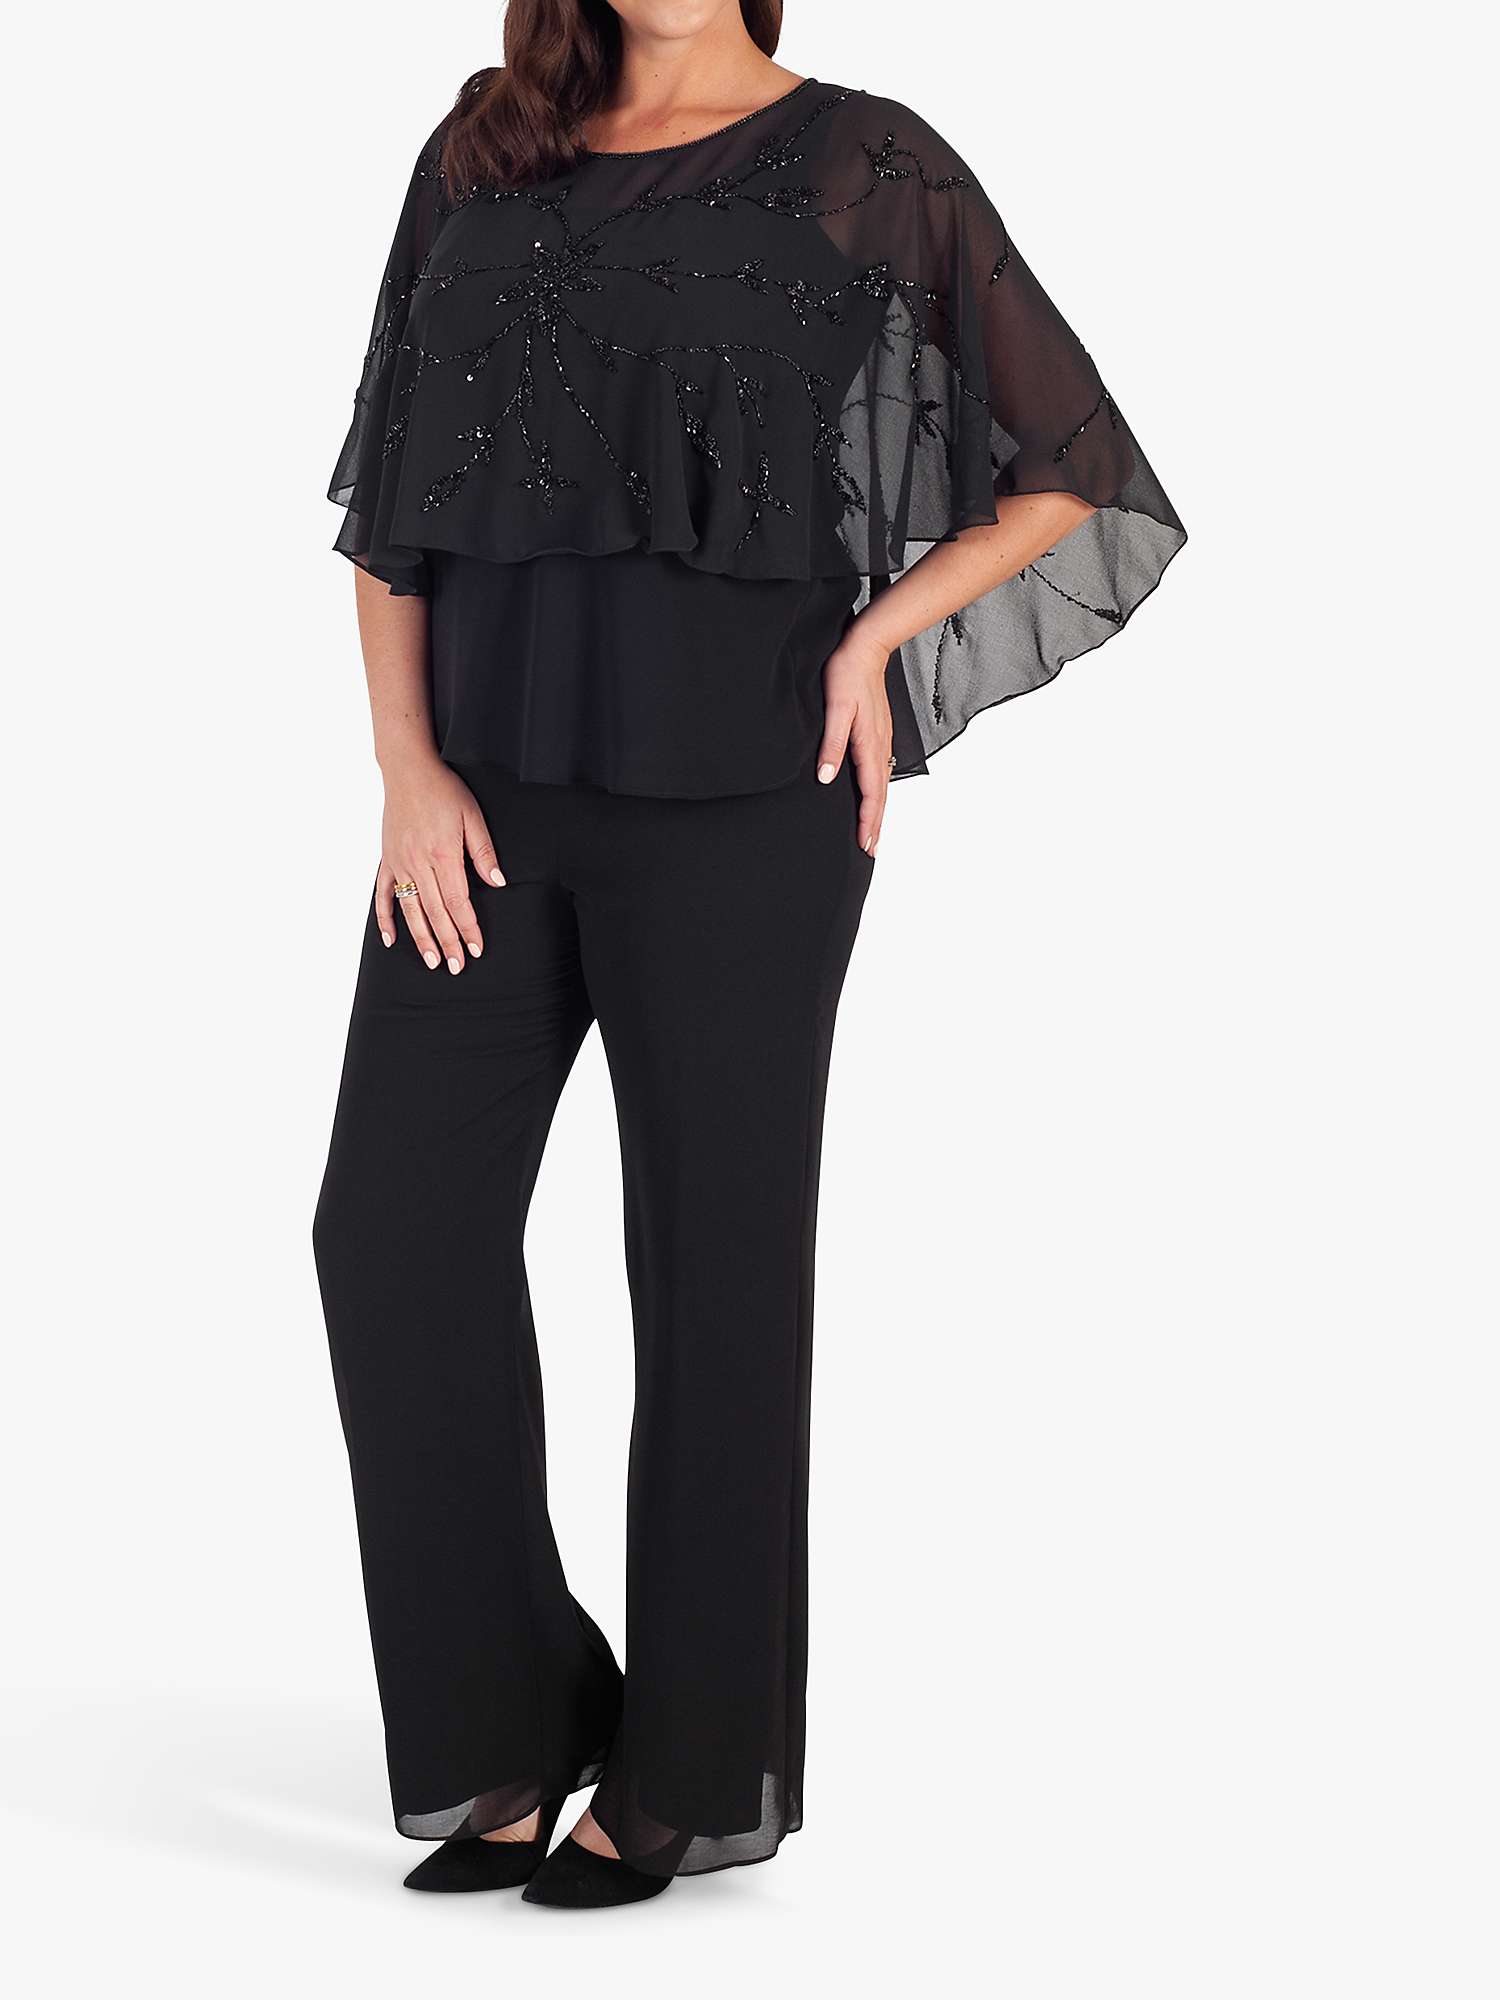 Buy Chesca Beaded Cape Online at johnlewis.com